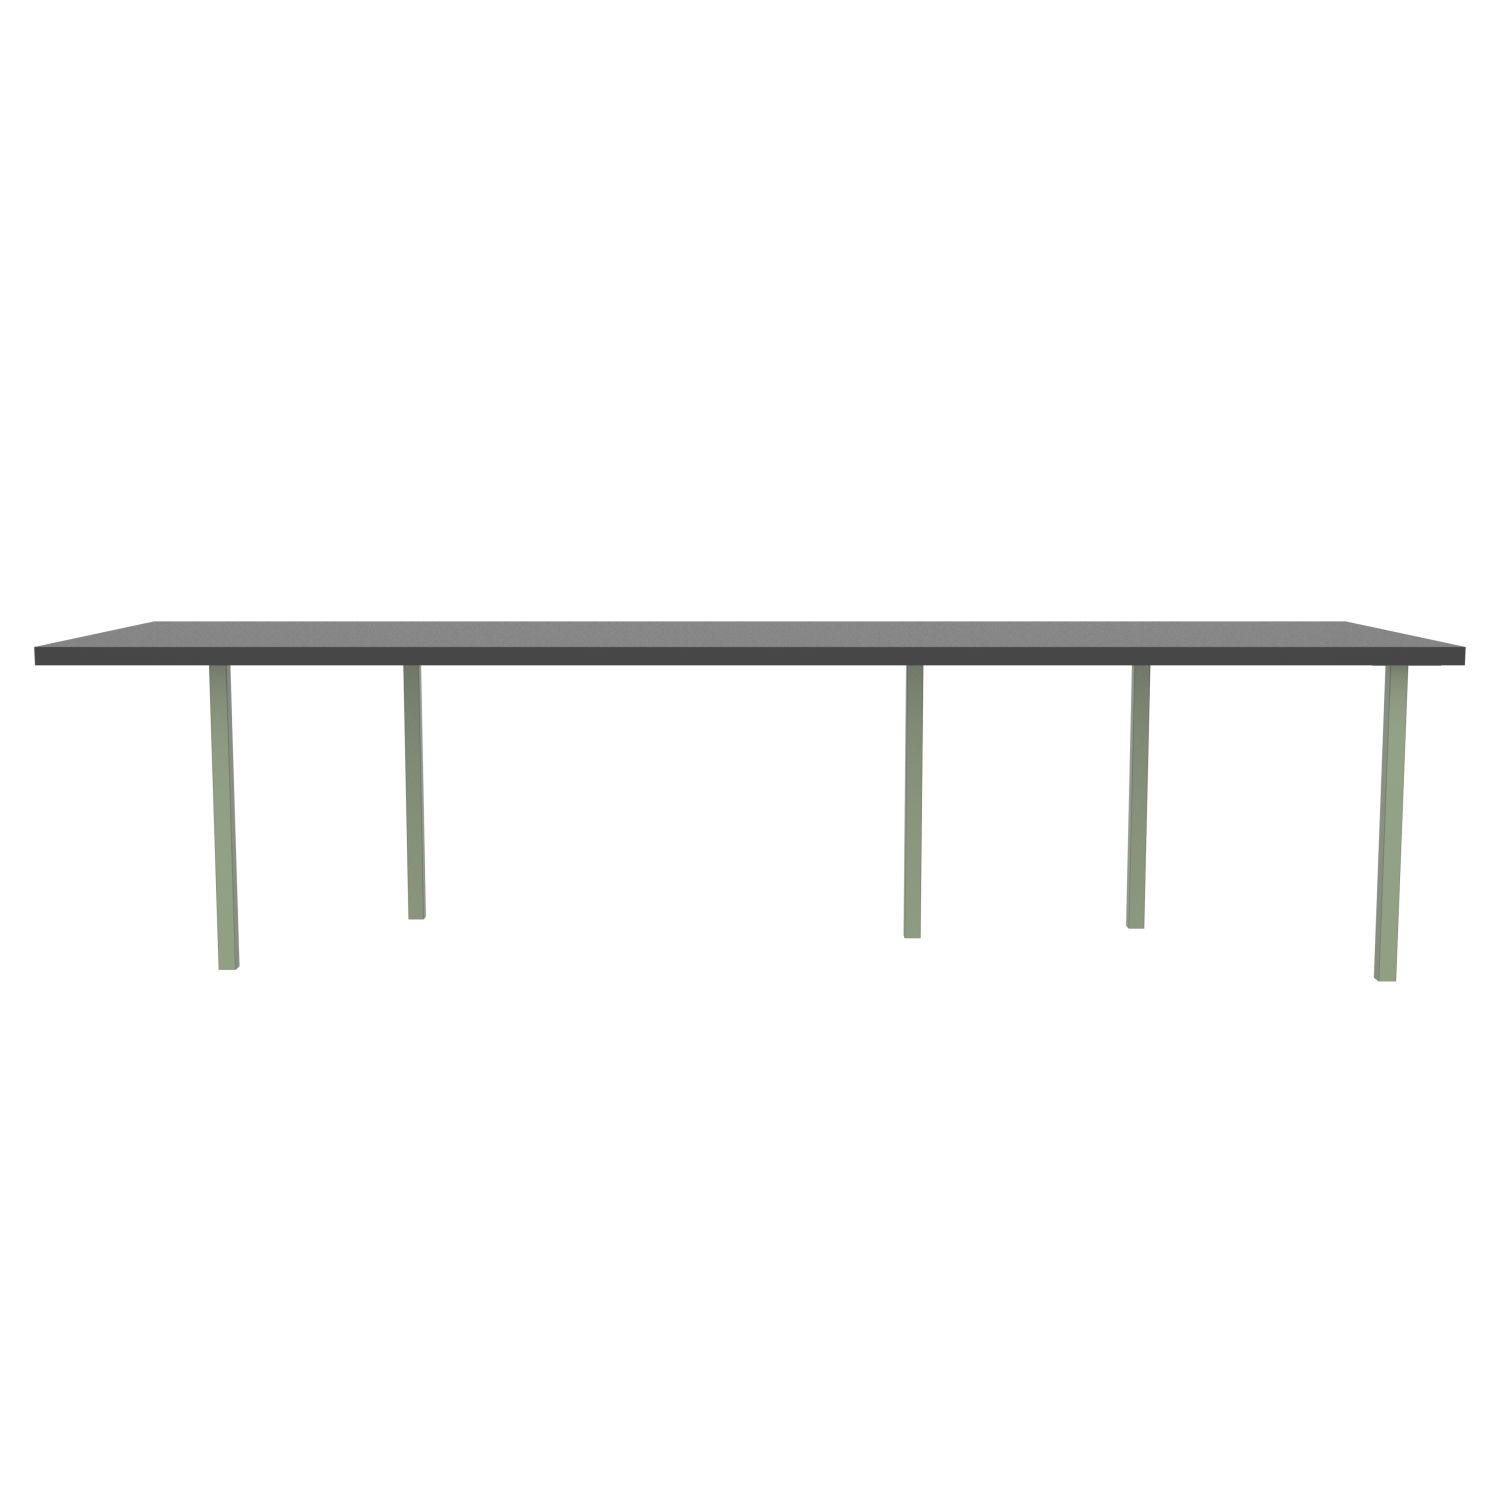 lensvelt bbrand table five fixed heigt 915x310 hpl black 50 mm price level 1 green ral6021